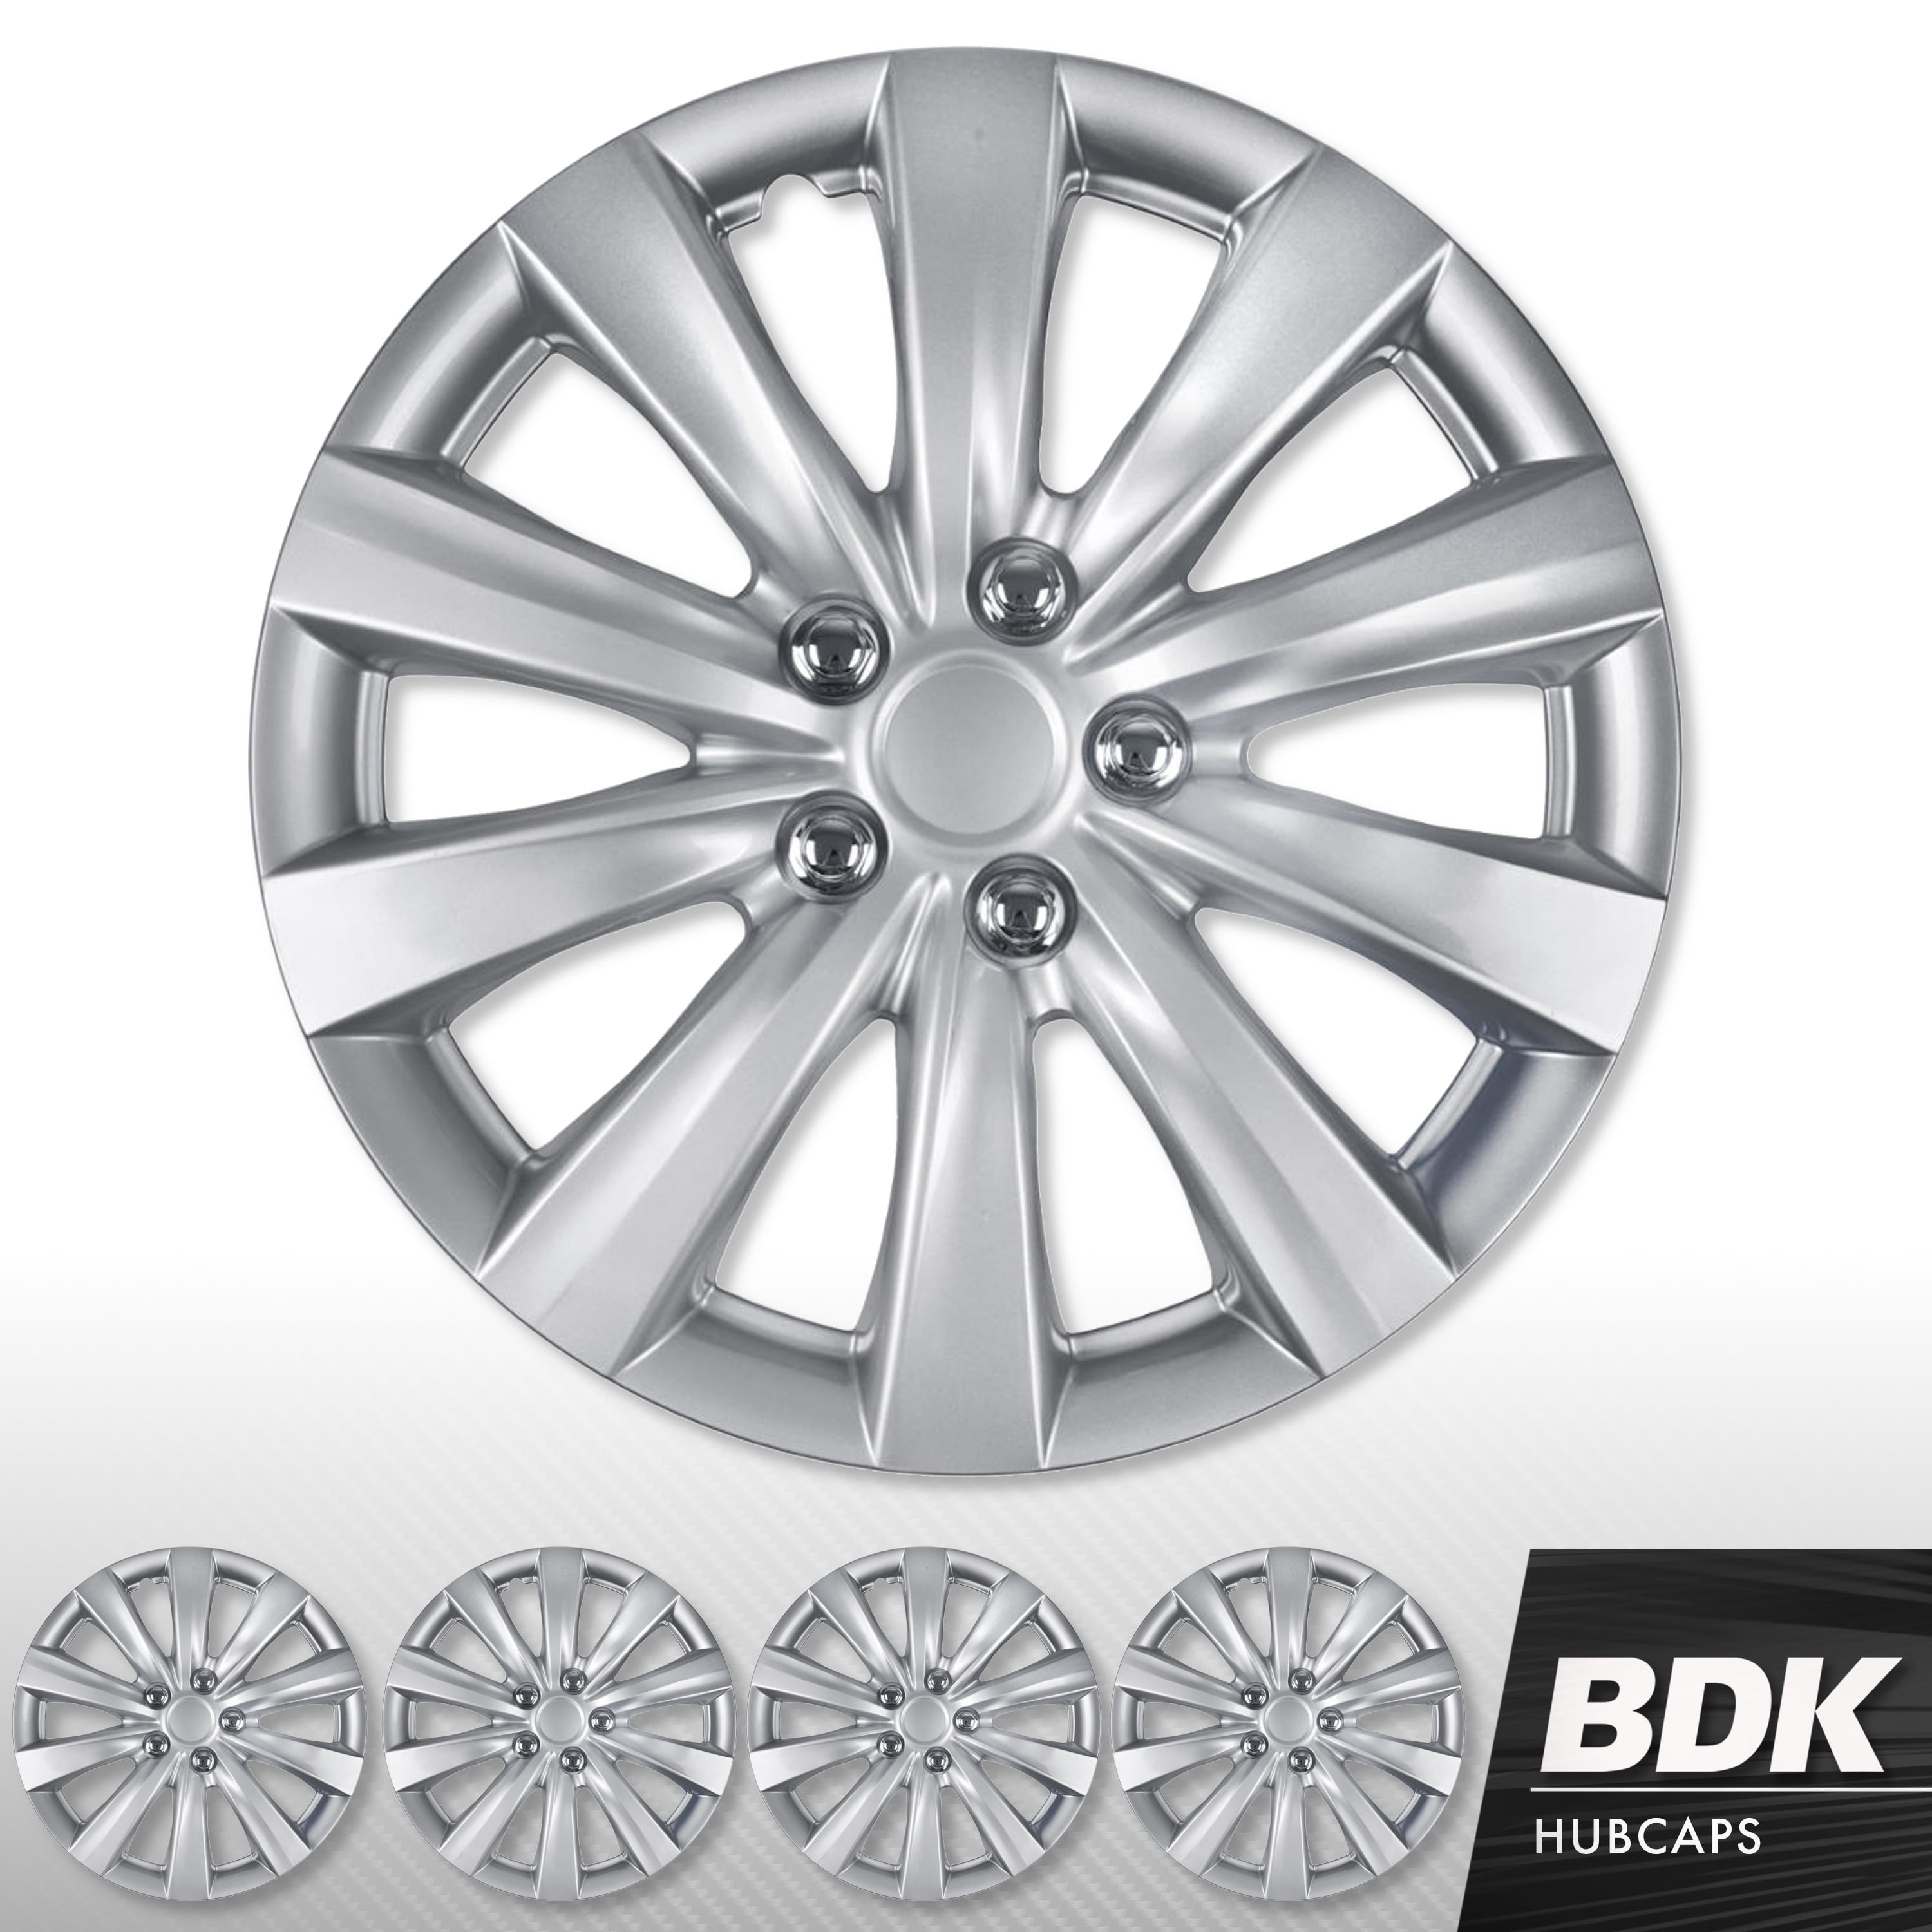 4 Pack of Premium 16 inch Hubcap Wheel Cover Replacements for OEM Steel Wheels, High Grade ABS with Retention Ring BDK 